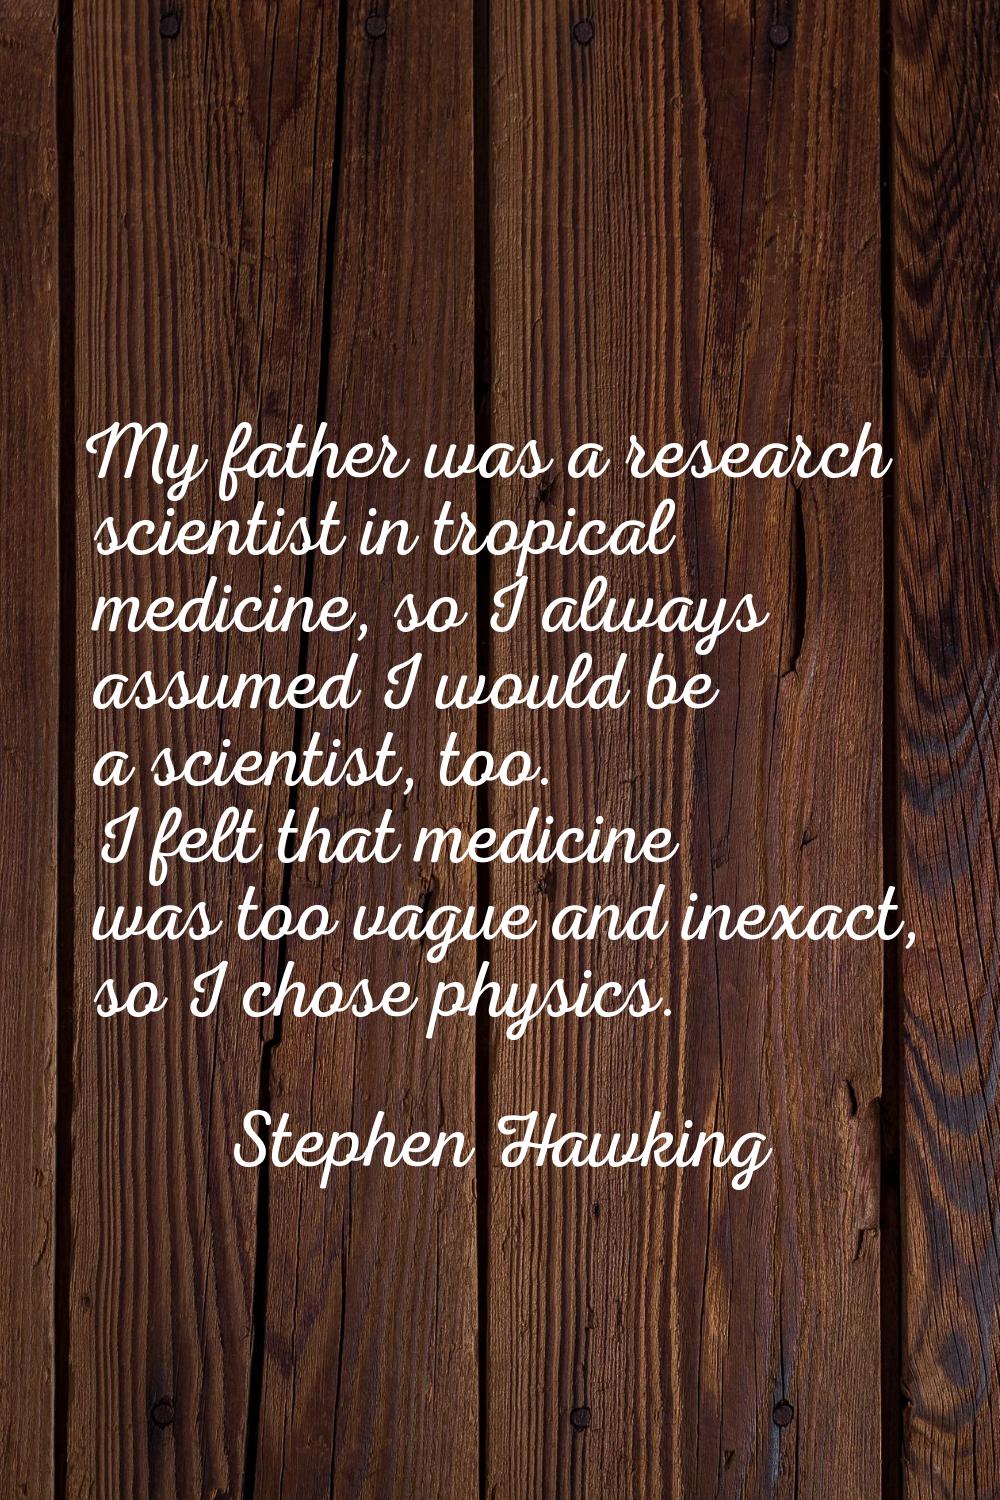 My father was a research scientist in tropical medicine, so I always assumed I would be a scientist